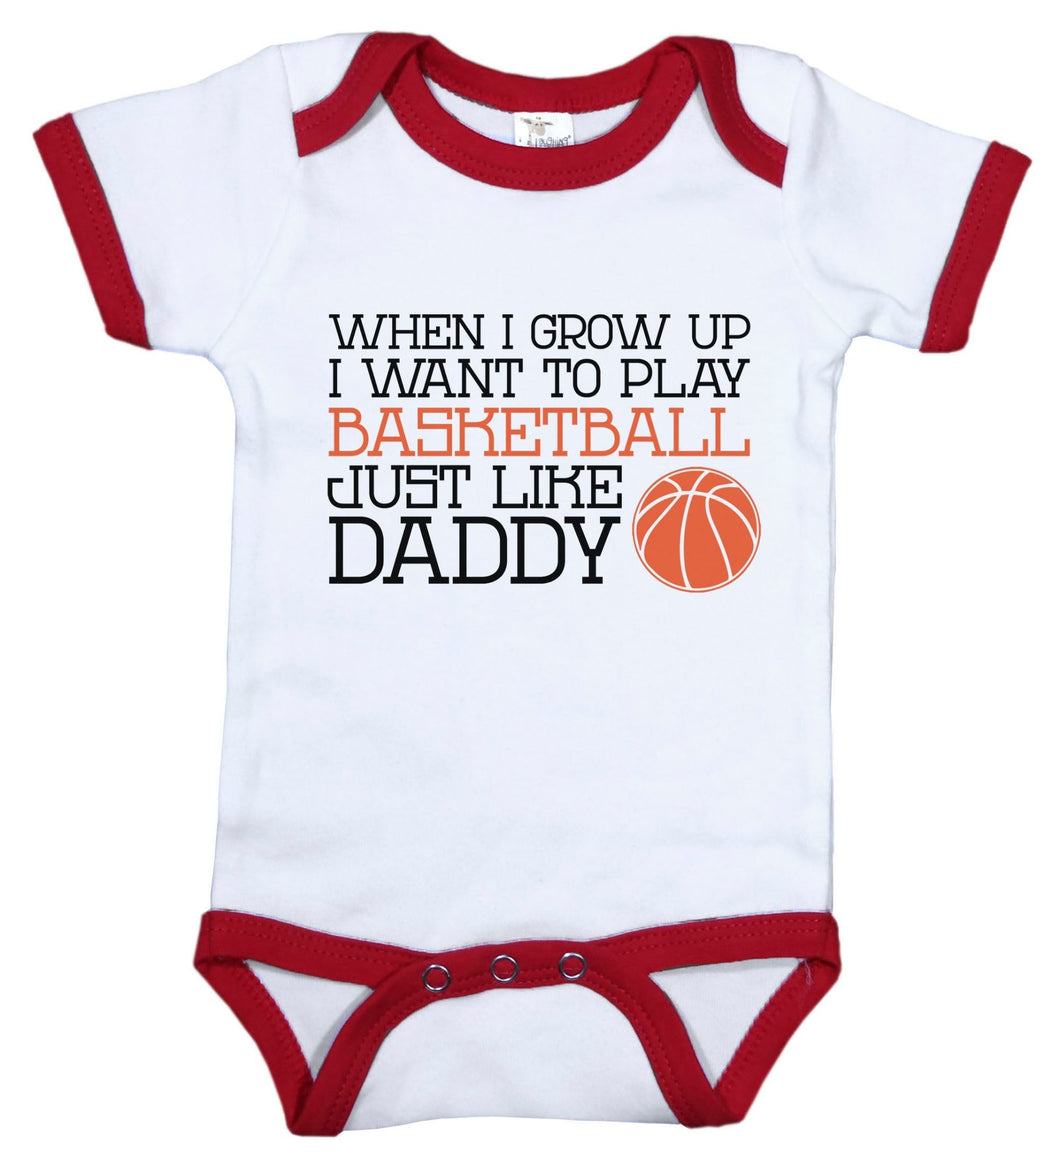 When I Grow Up I Want To Play Basketball Just Like Daddy / B-Ball Ringer Onesie - Baffle